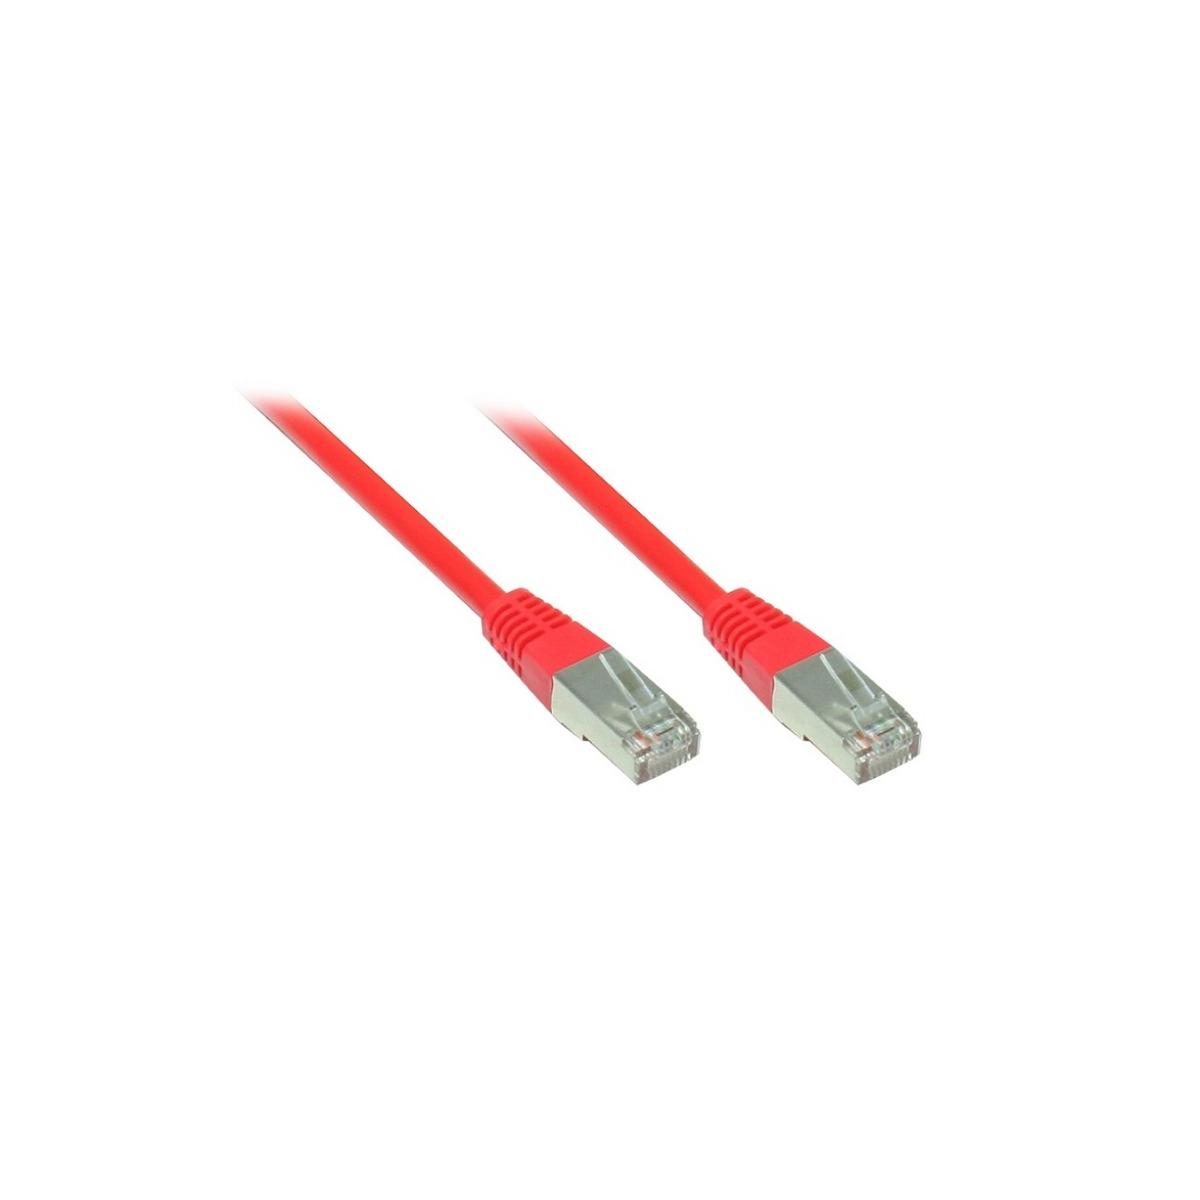 VARIA GROUP SO-30975 Patchkabel Cat.5, Rot